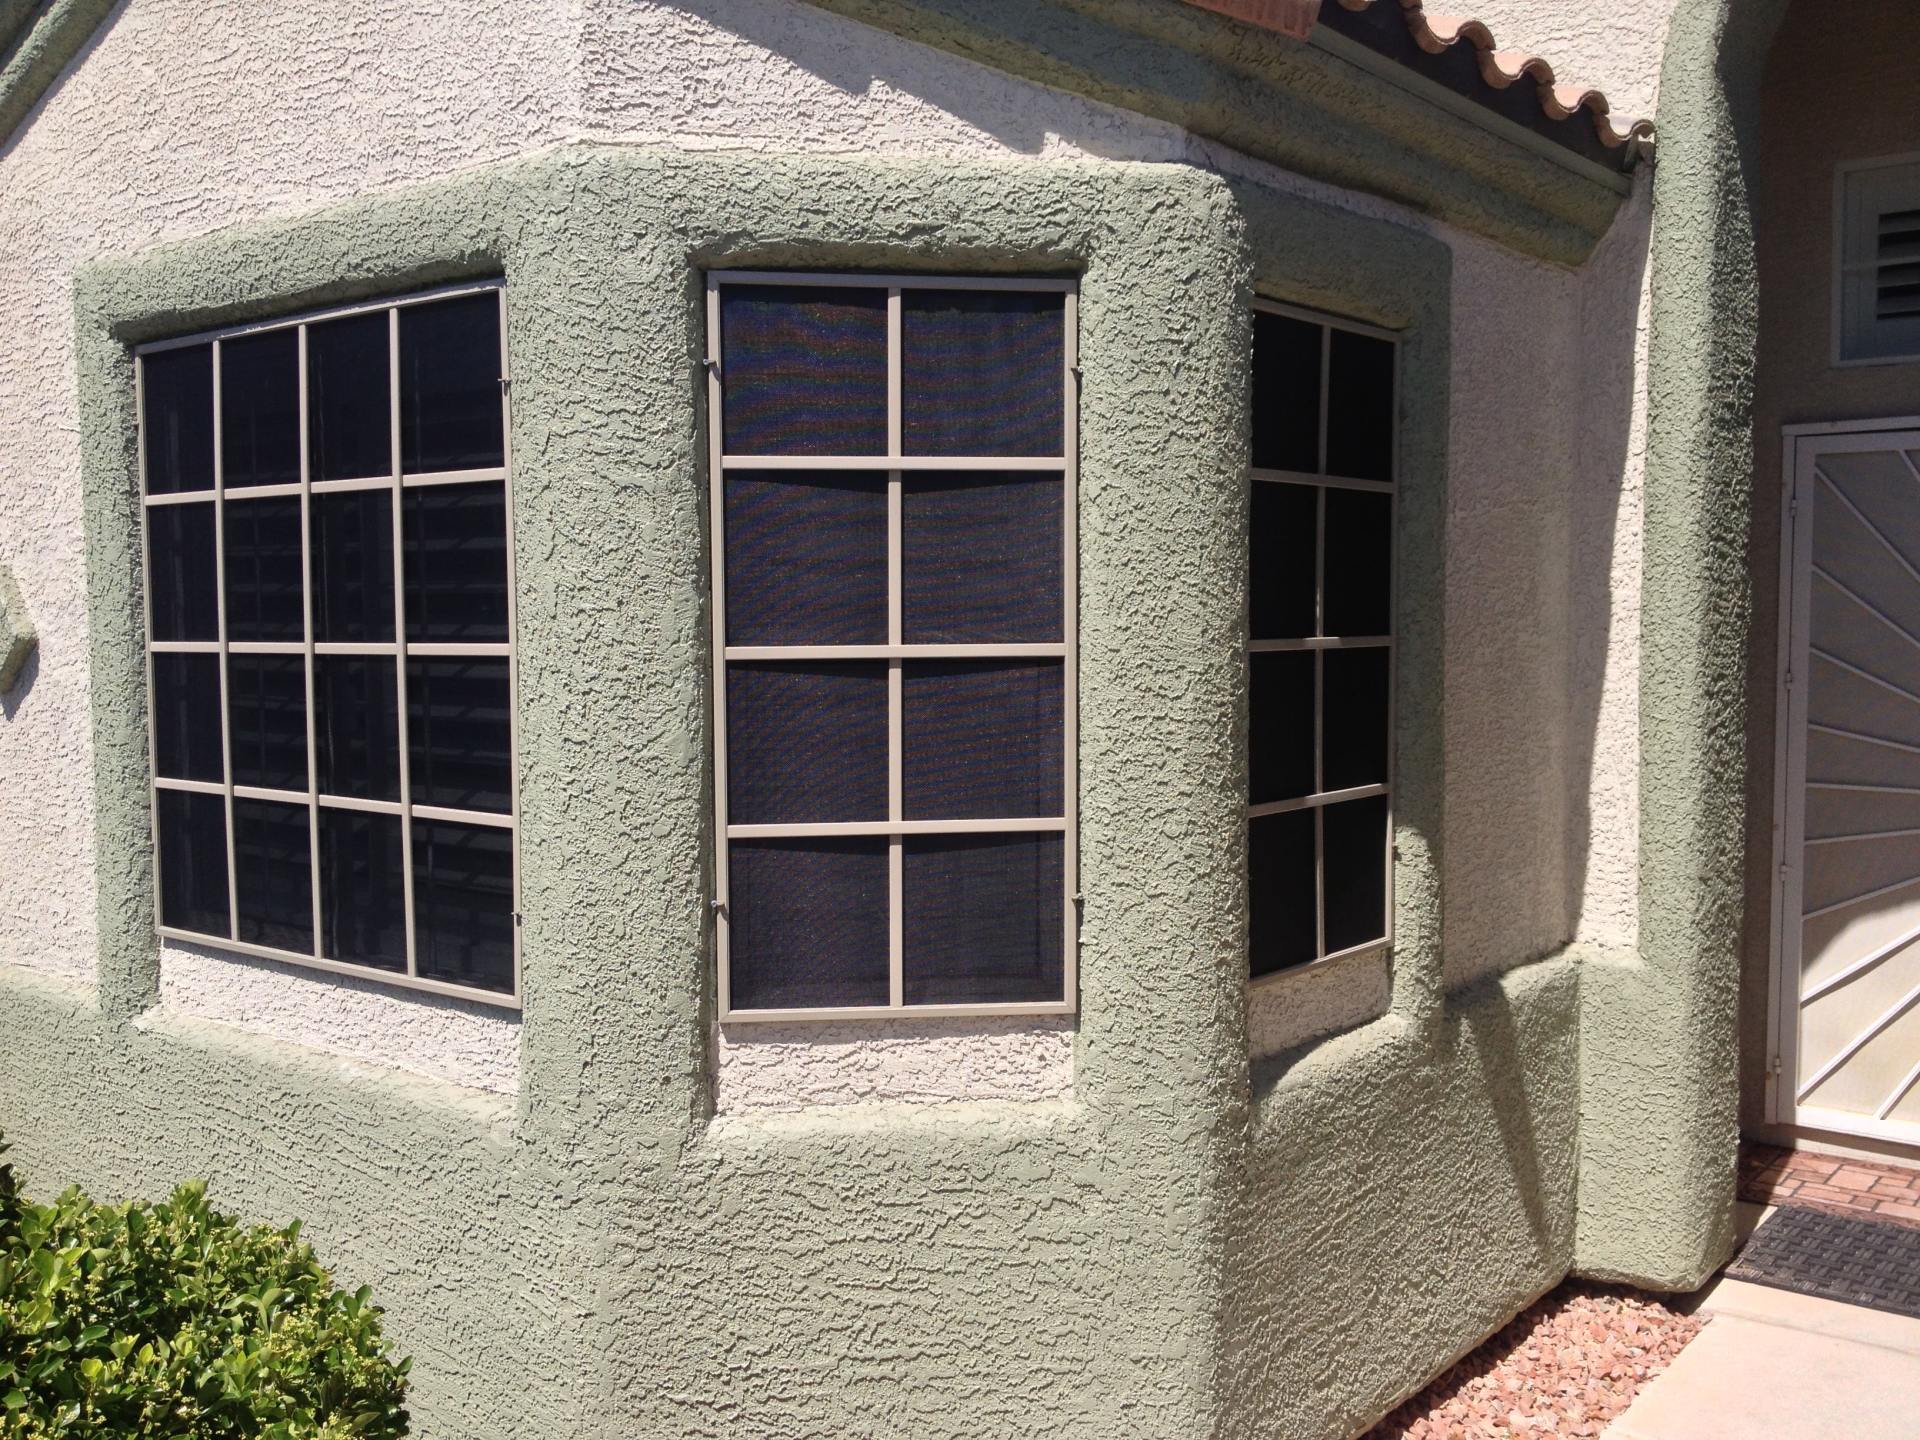 House Windows with Solar Screens - Heat Protection in Las Vegas, NV